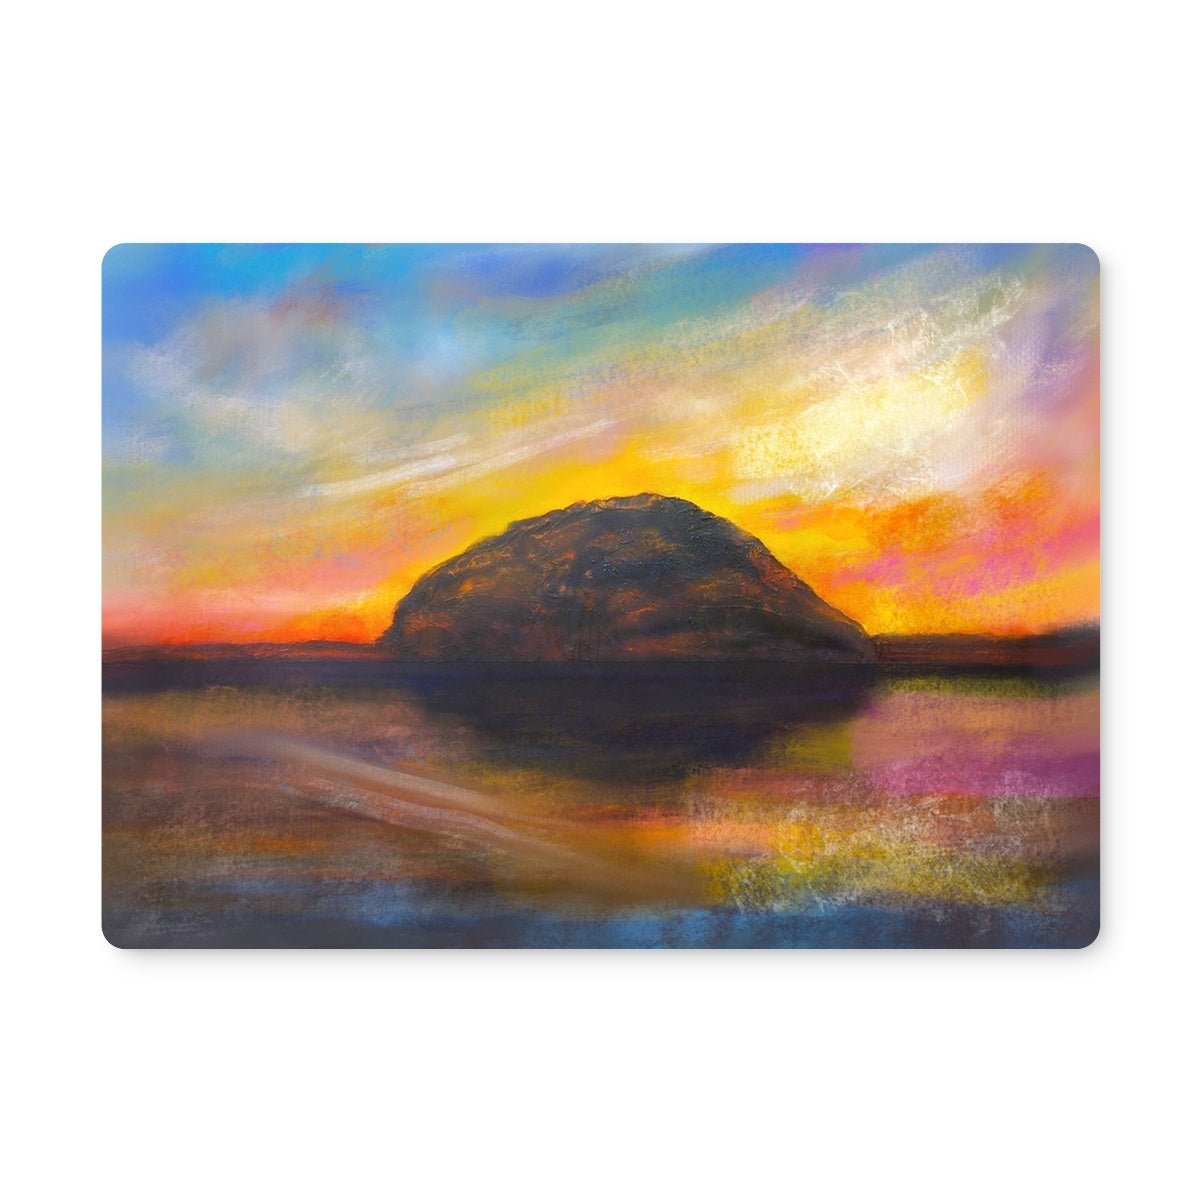 Ailsa Craig Dusk Arran Art Gifts Placemat-Placemats-Arran Art Gallery-2 Placemats-Paintings, Prints, Homeware, Art Gifts From Scotland By Scottish Artist Kevin Hunter